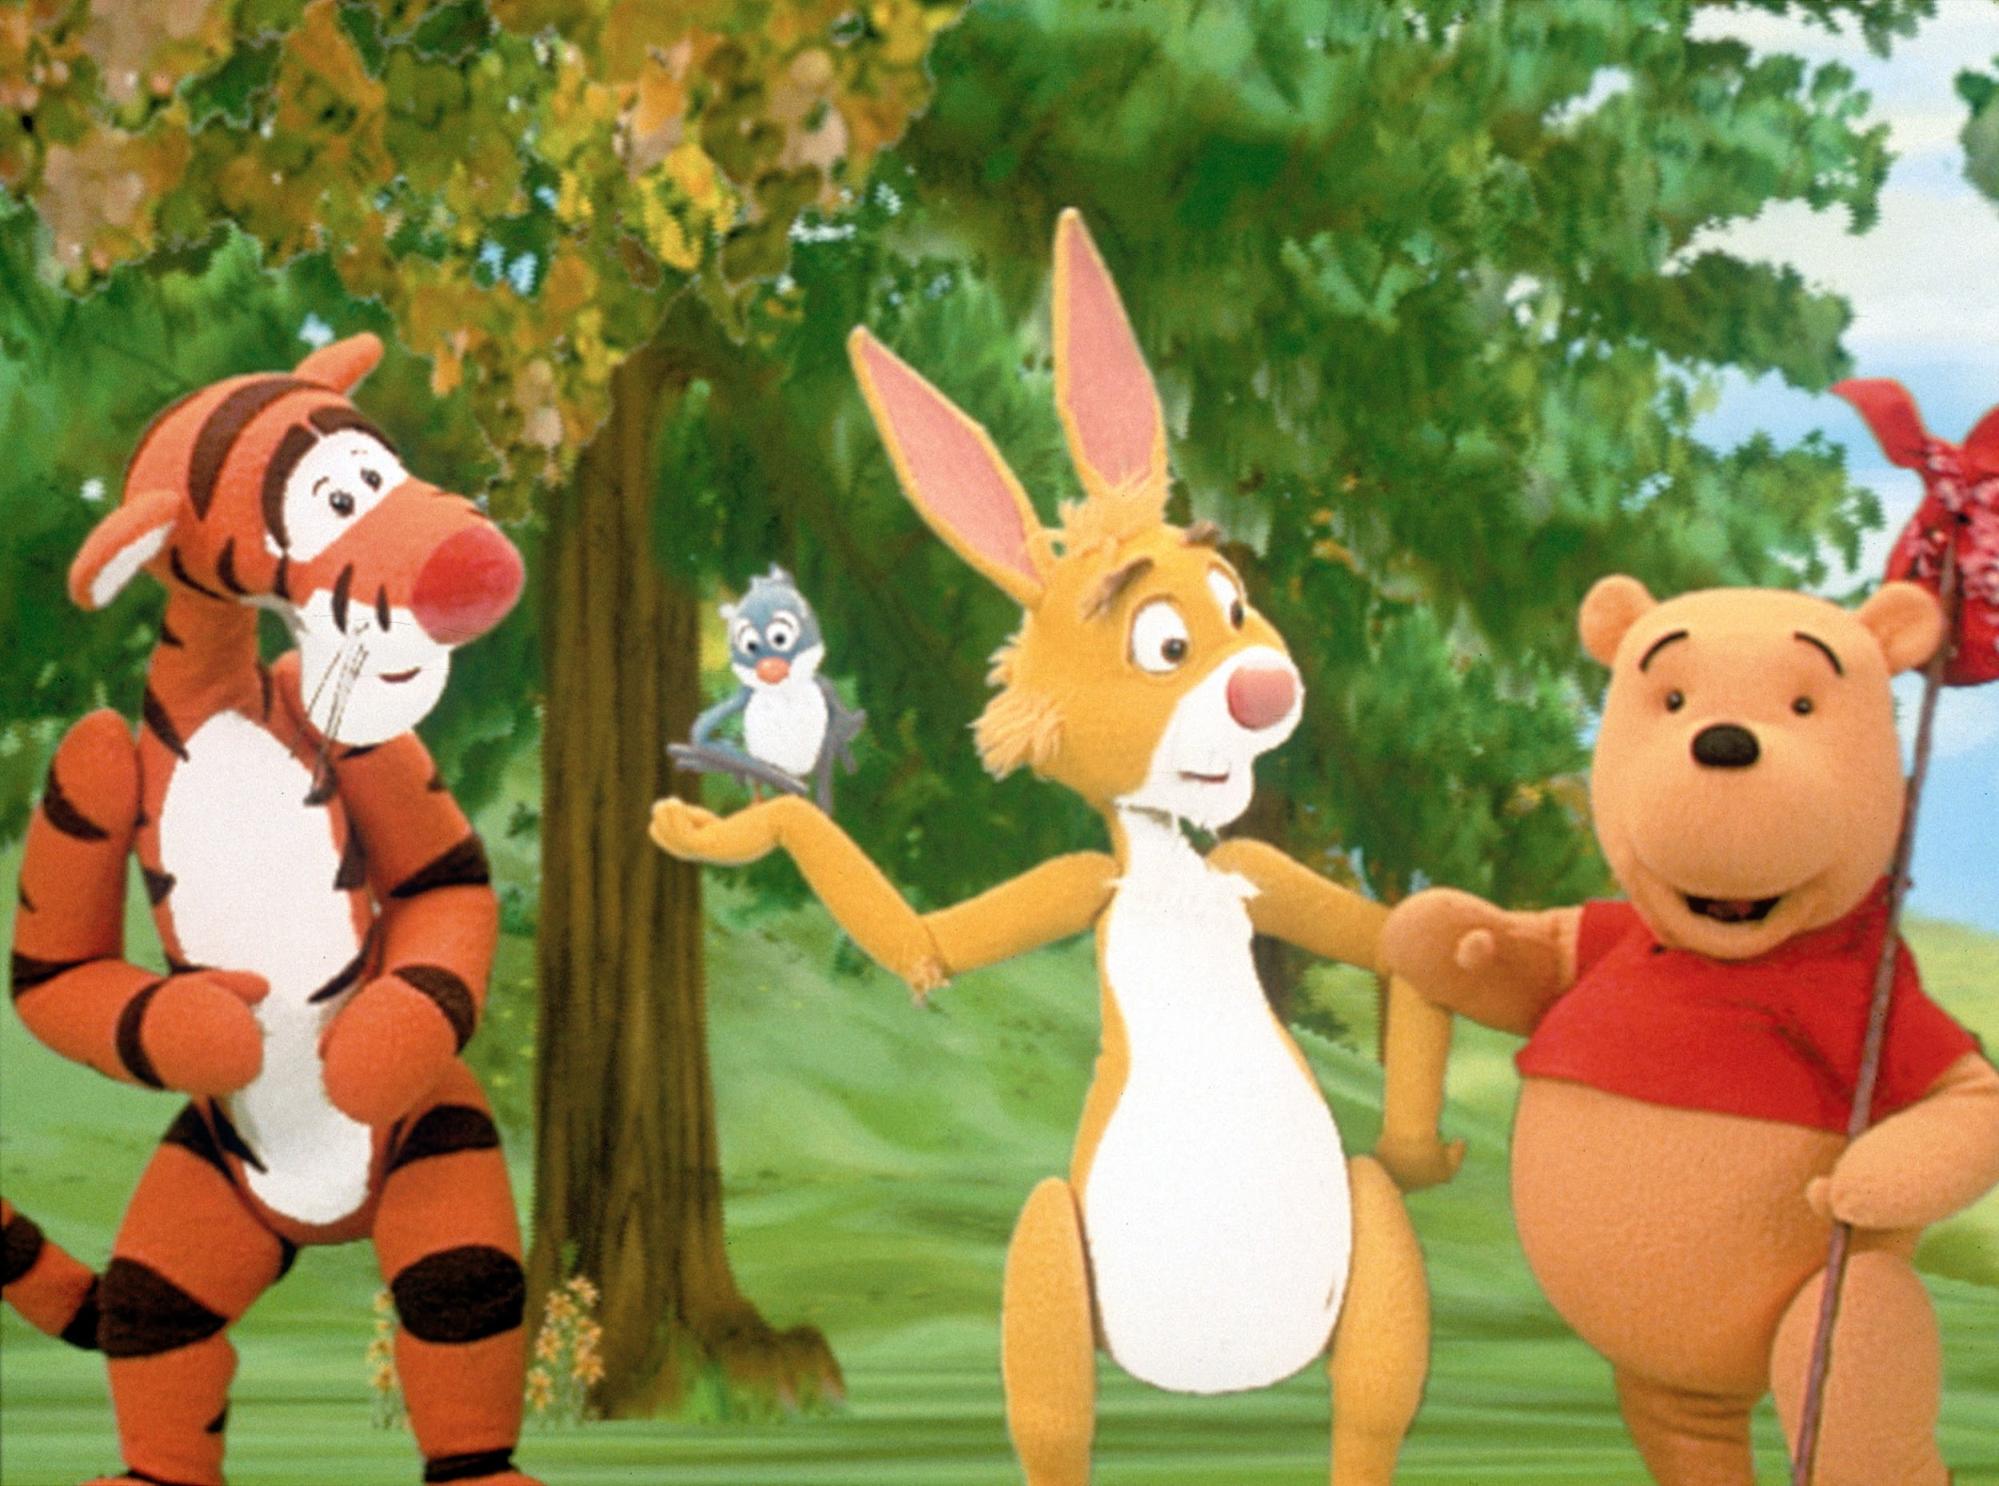 Best Disney Plus Shows For Toddlers - The Book Of Pooh